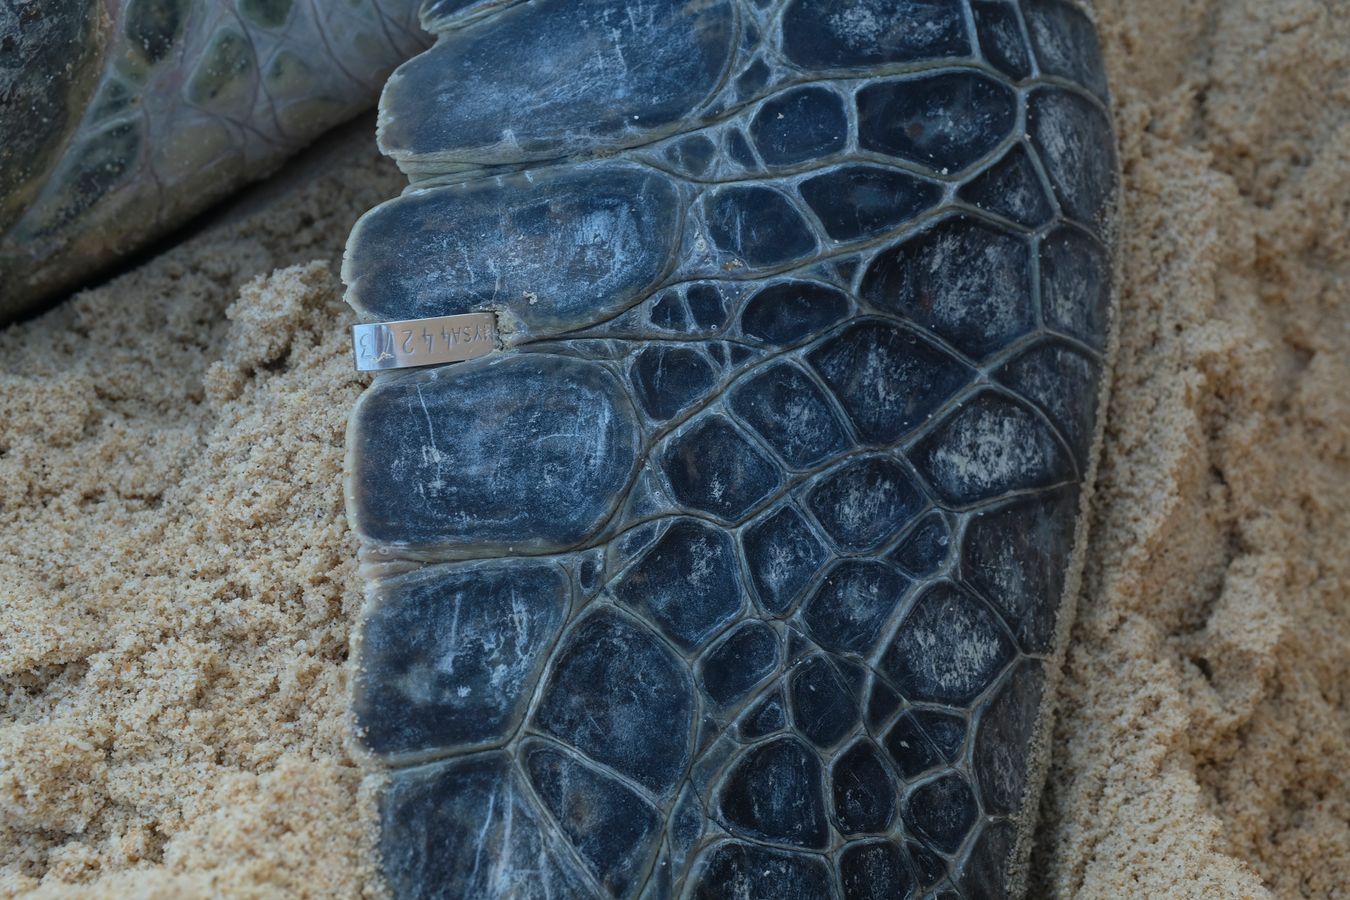 Right front flipper of a green turtle with its tag identification number.